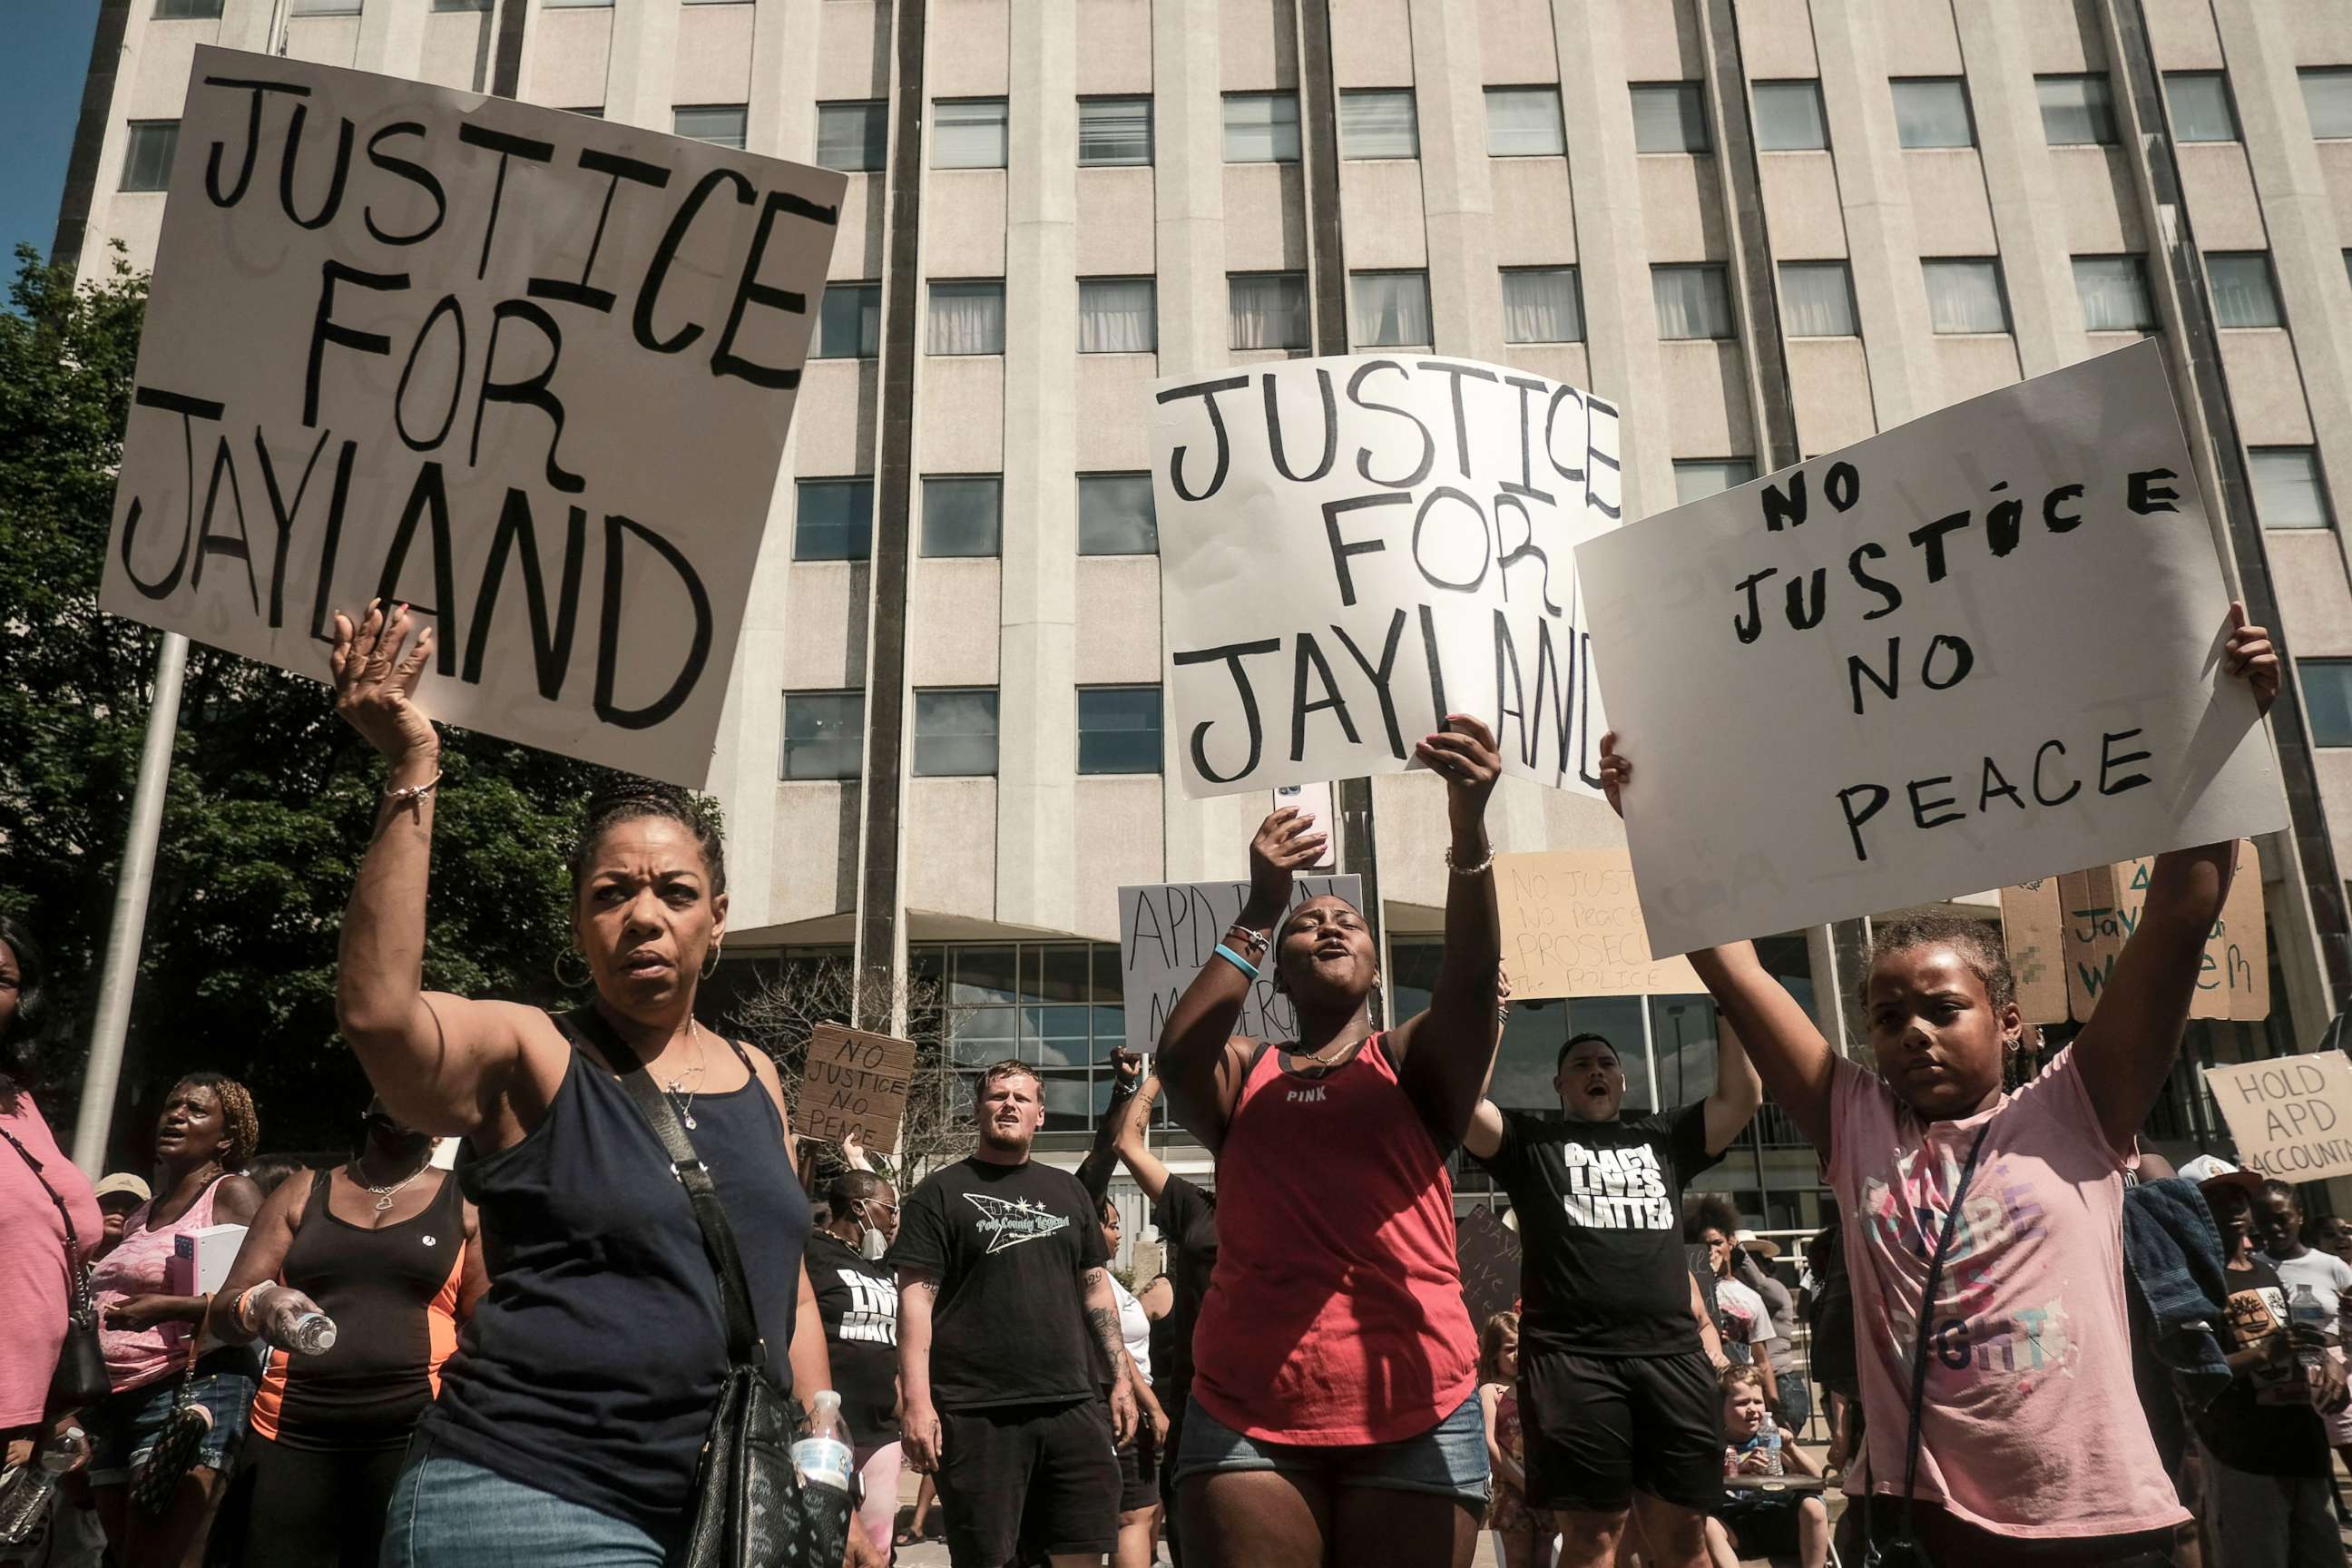 PHOTO: Demonstrators hold "Justice for Jayland" signs as they gather outside Akron City Hall to protest the killing of Jayland Walker, shot by police, in Akron, Ohio, July 3, 2022.